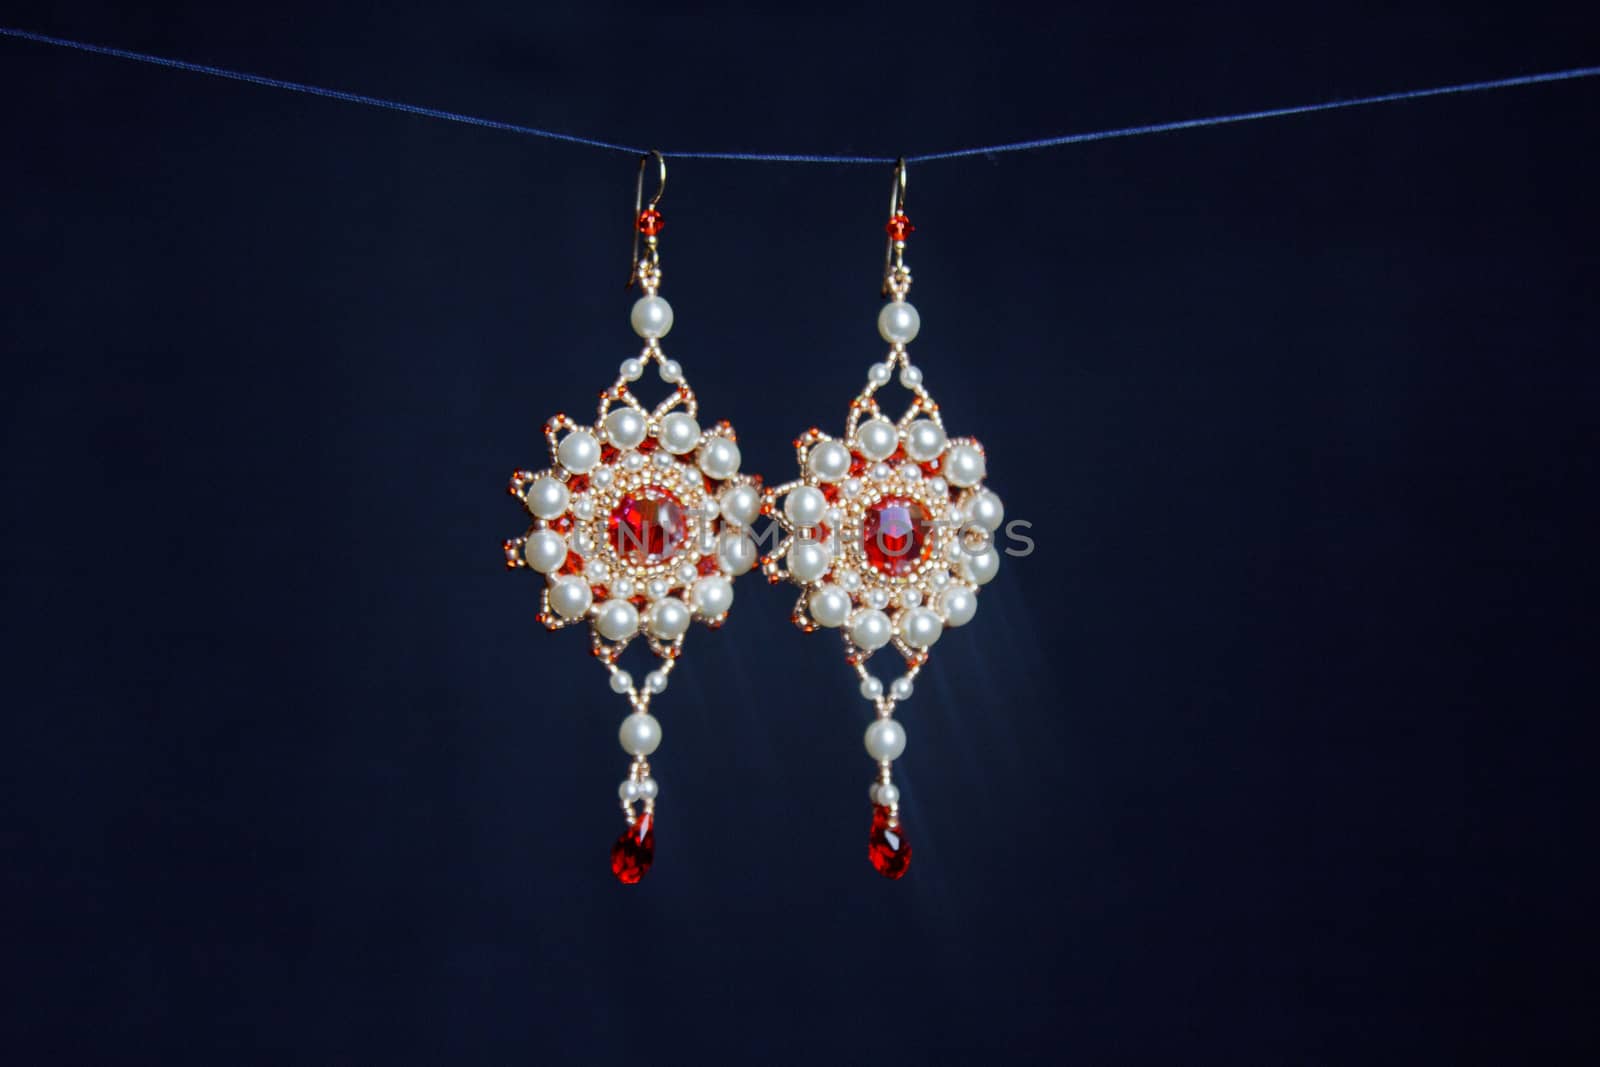 handmade jewelry made of beads in macro. earrings from white beads. earrings from stones. beautiful ornaments. earrings from red beads. ornaments on a black background